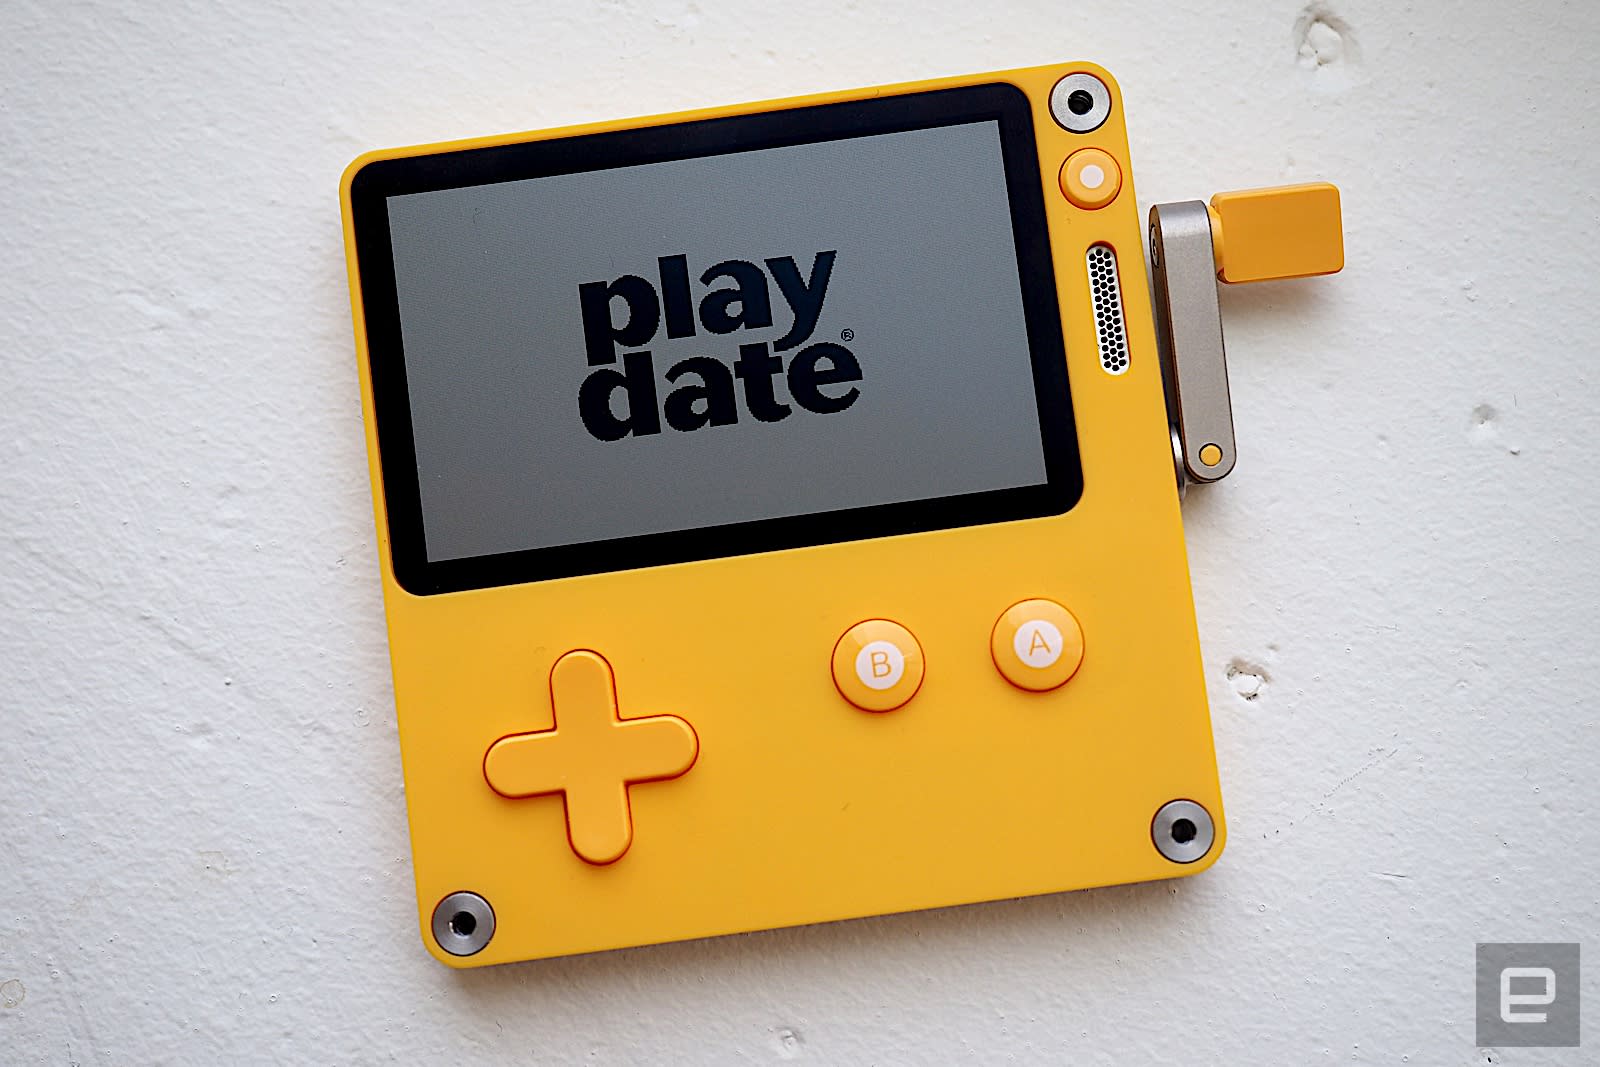 Panic's Playdate handheld console that plays retro games with a crank